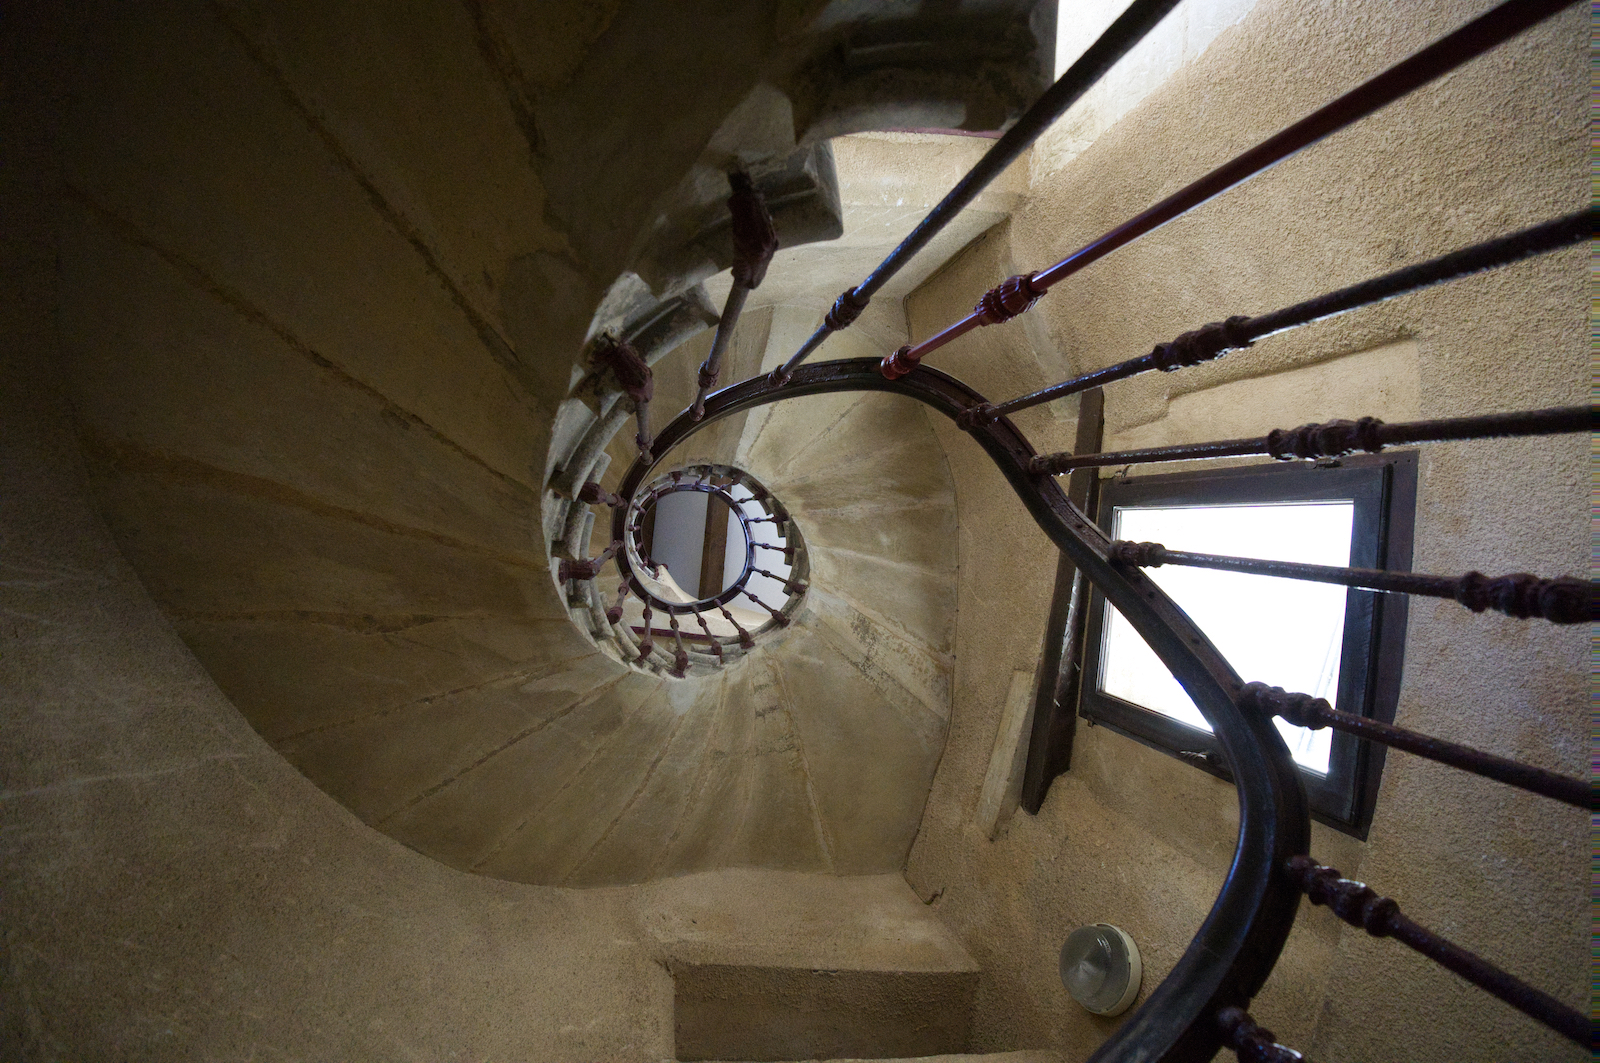 Sample image shot using the Sony Alpha A6700 of a spiral staircase